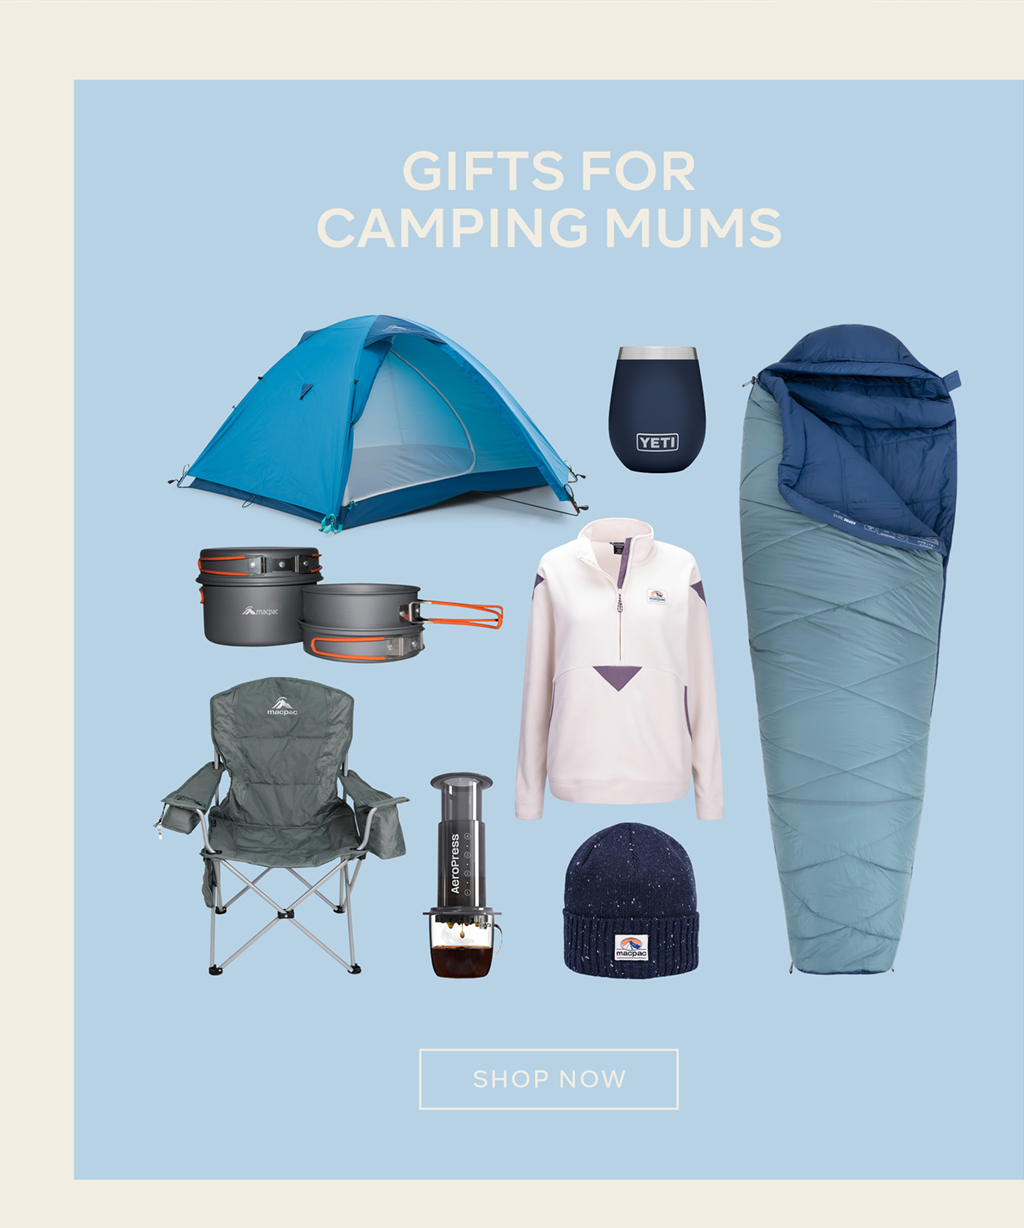 GIFTS FOR CAMPING MUMS